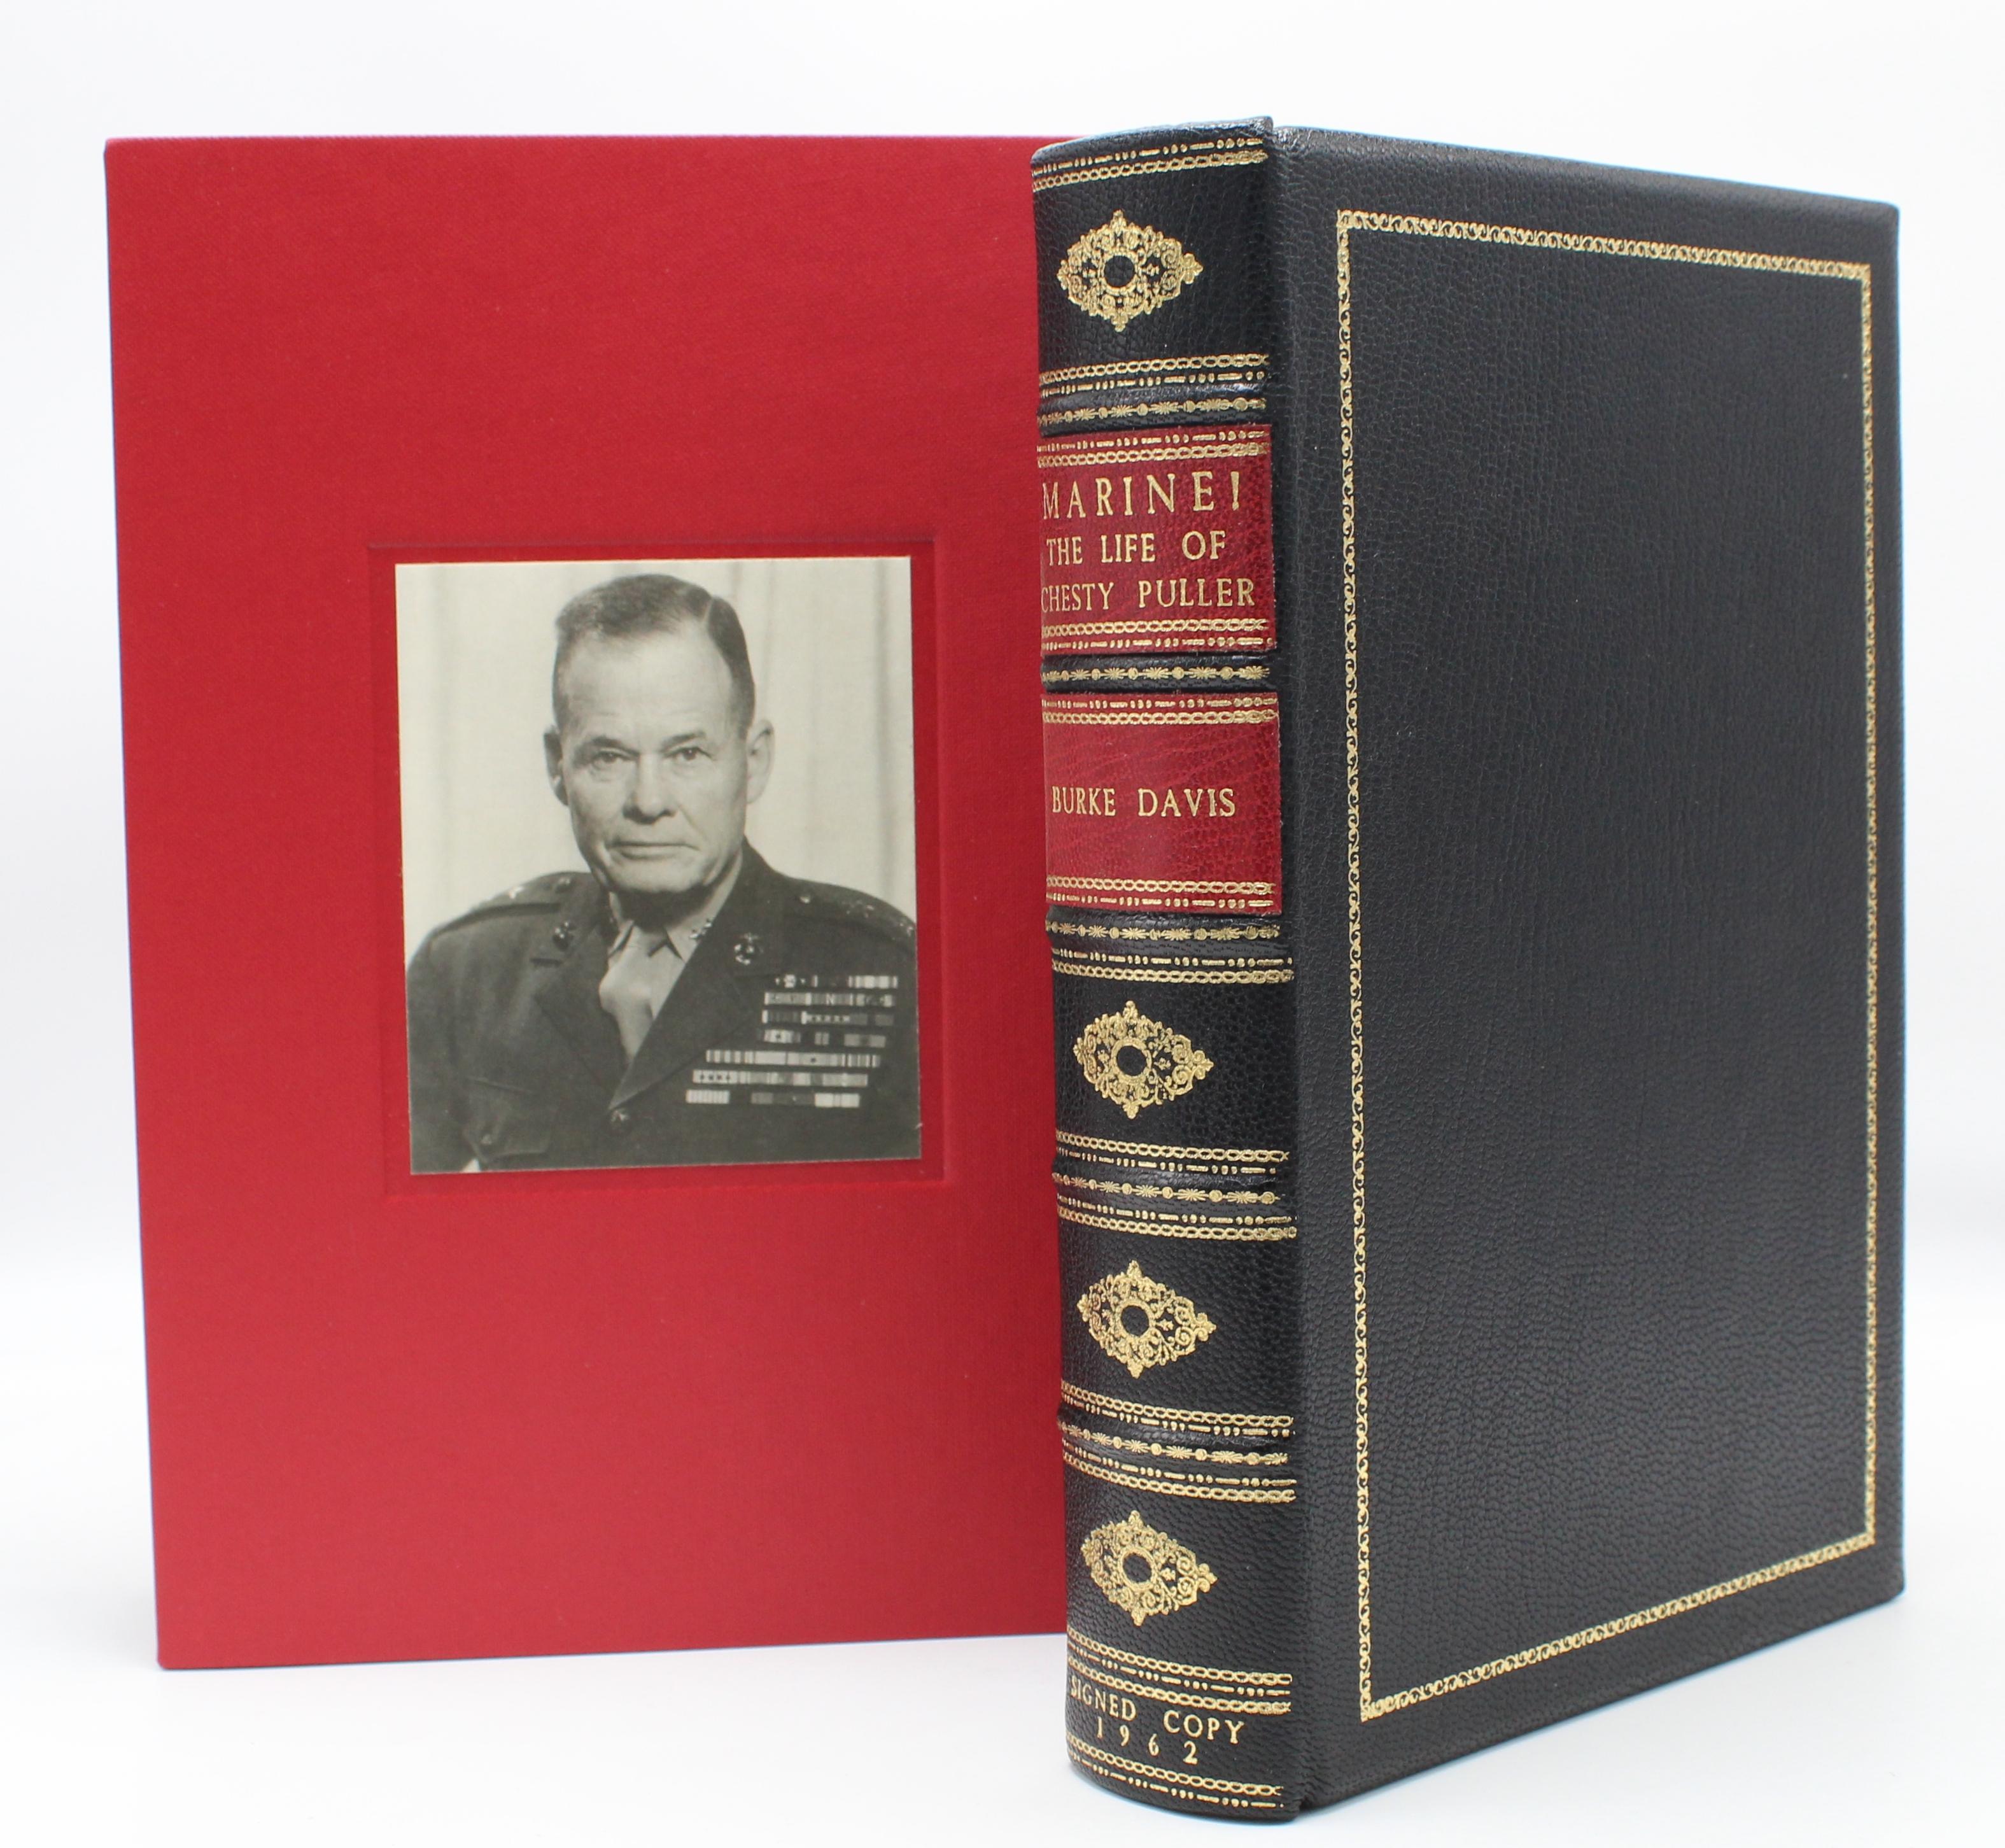 Marine! The Life of Chesty Puller by Burke Davis, Signed and Inscribed by Chesty Puller, Second Printing, 1962

Davis, Burke. Marine! The Life of Chesty Puller. Boston and Toronto: Little, Brown and Co., 1962. Second Printing. Signed by Puller on